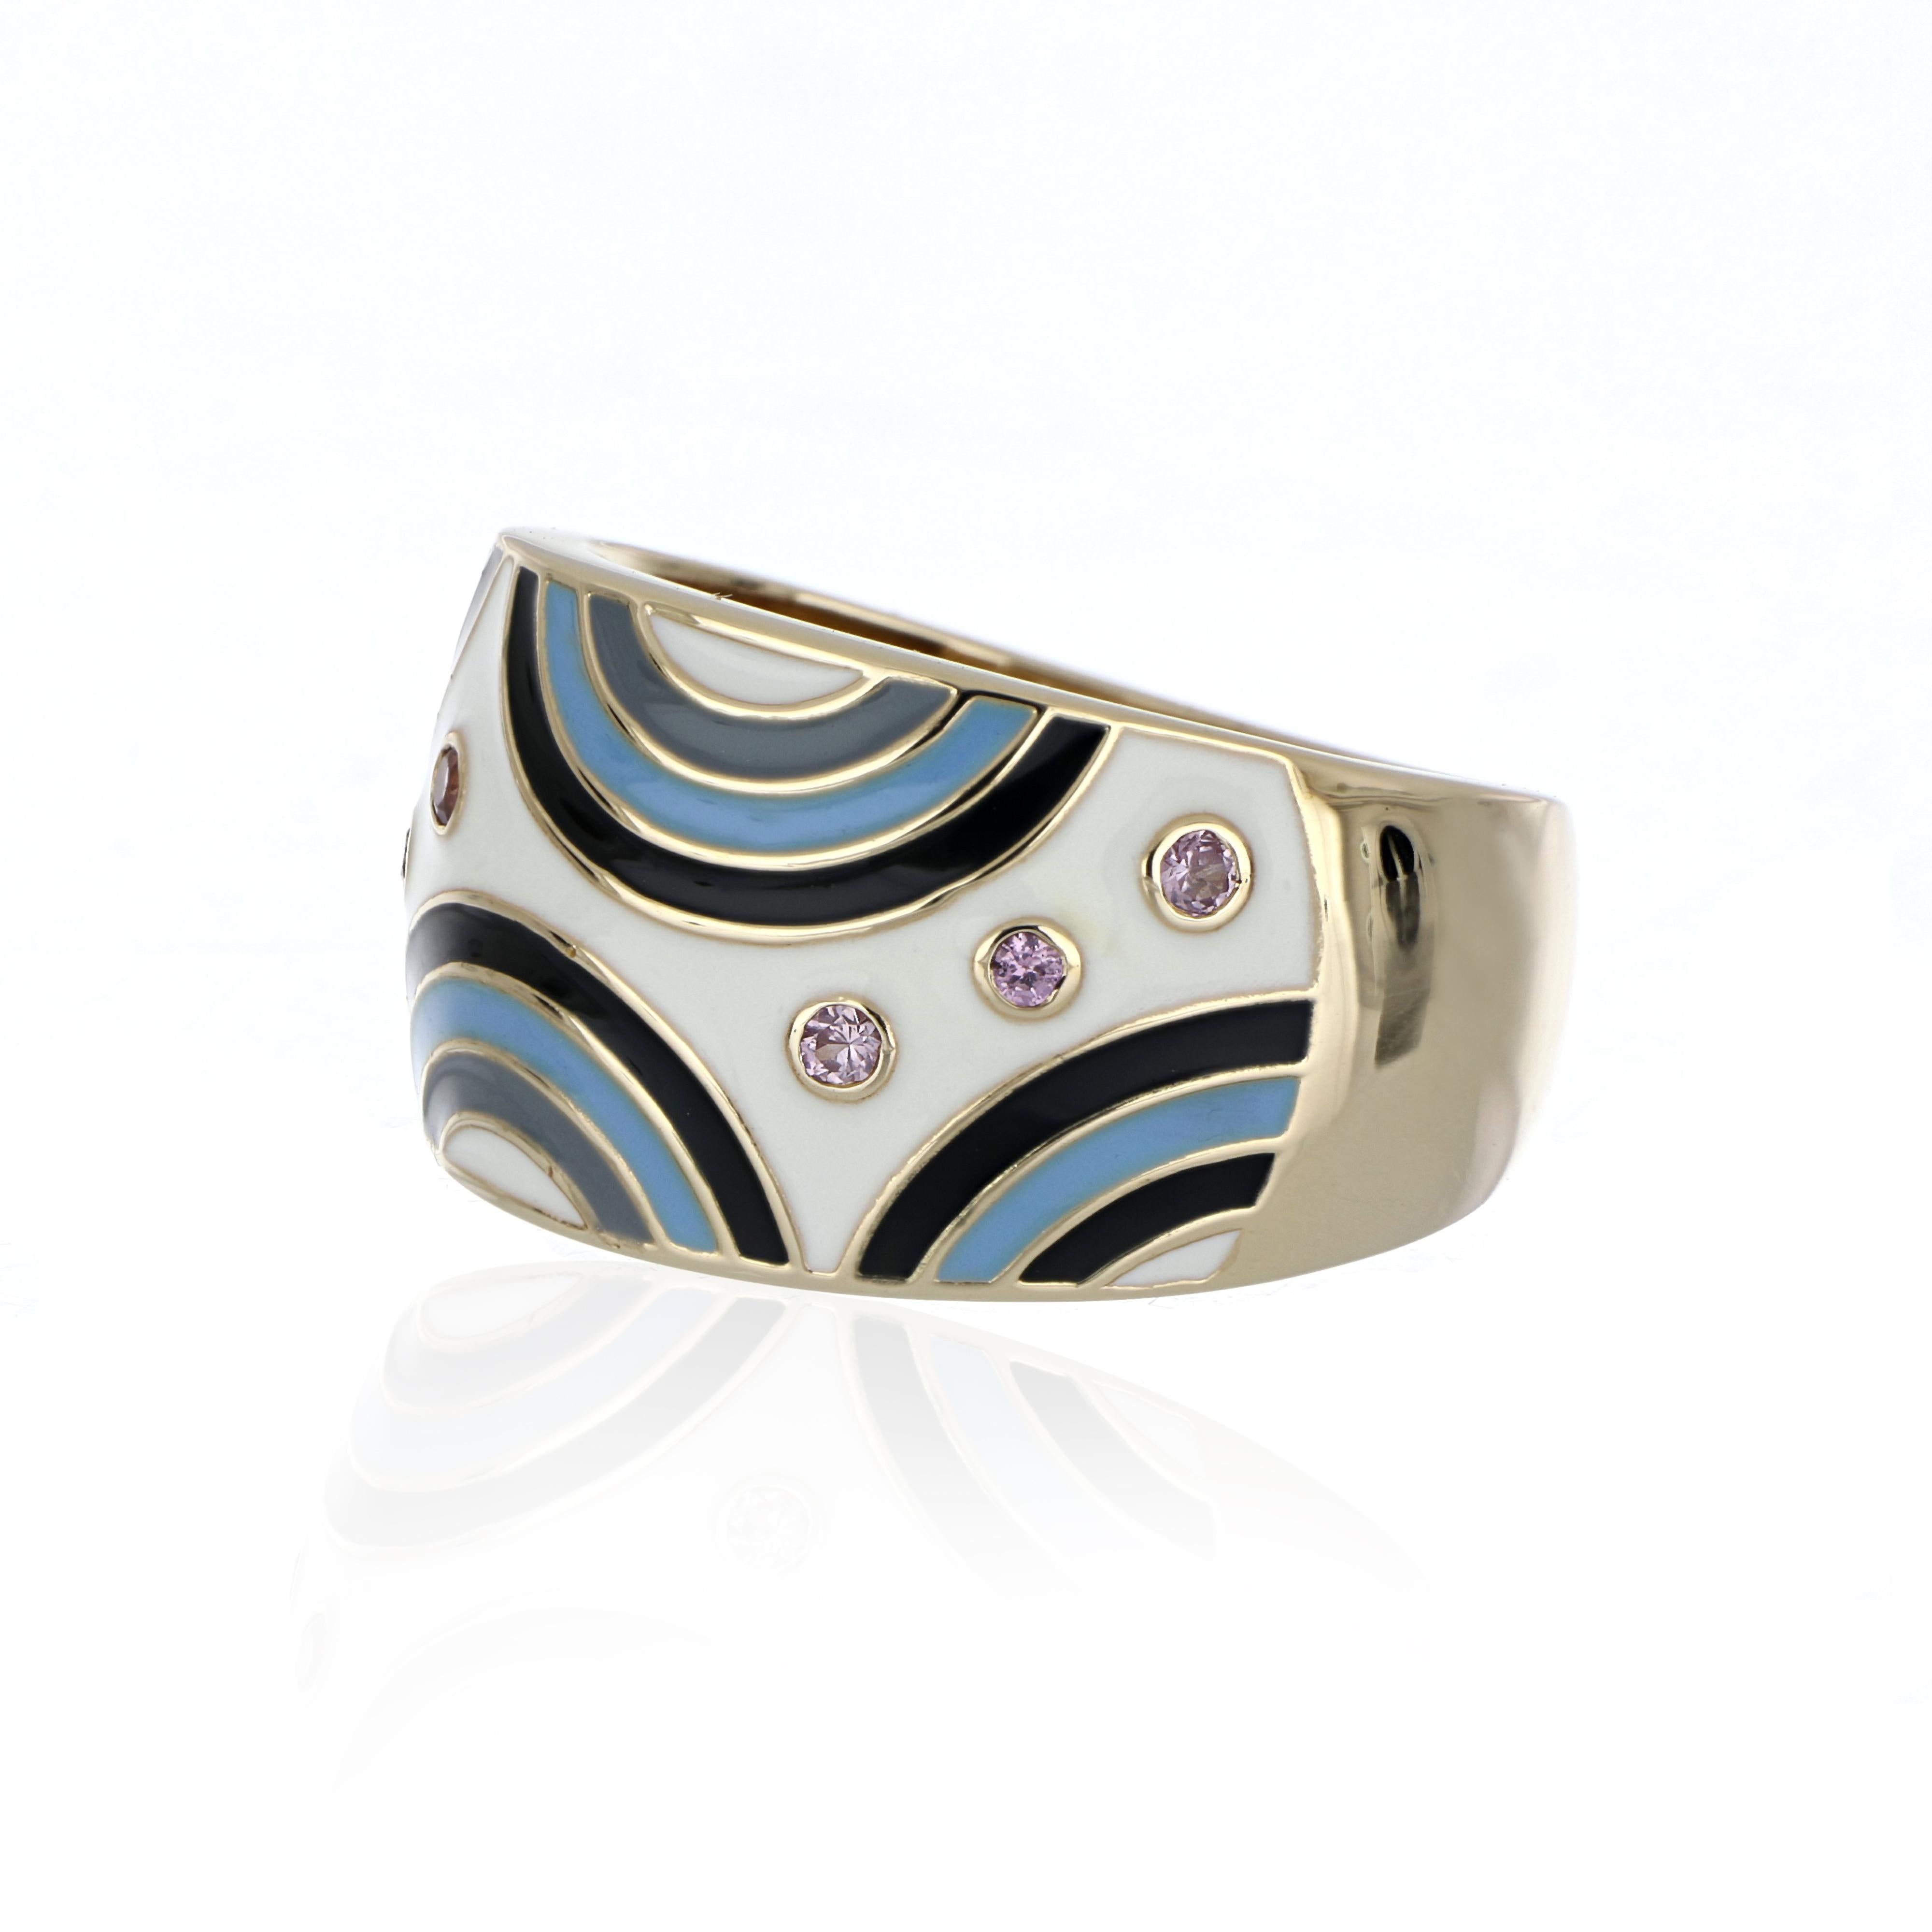 Elegant and exquisite Multi Colored Enamel Cocktail 14 K Ring, accented with Diamonds, weighing approx. 0.17 cts. Beautifully Hand crafted in 14 Karat Yellow Gold.


Stone Size:
Pink Sapphire: 1.50 x 1.50 mm , 1.75 x 1.75 mm

Approx. Wt.: 0.17